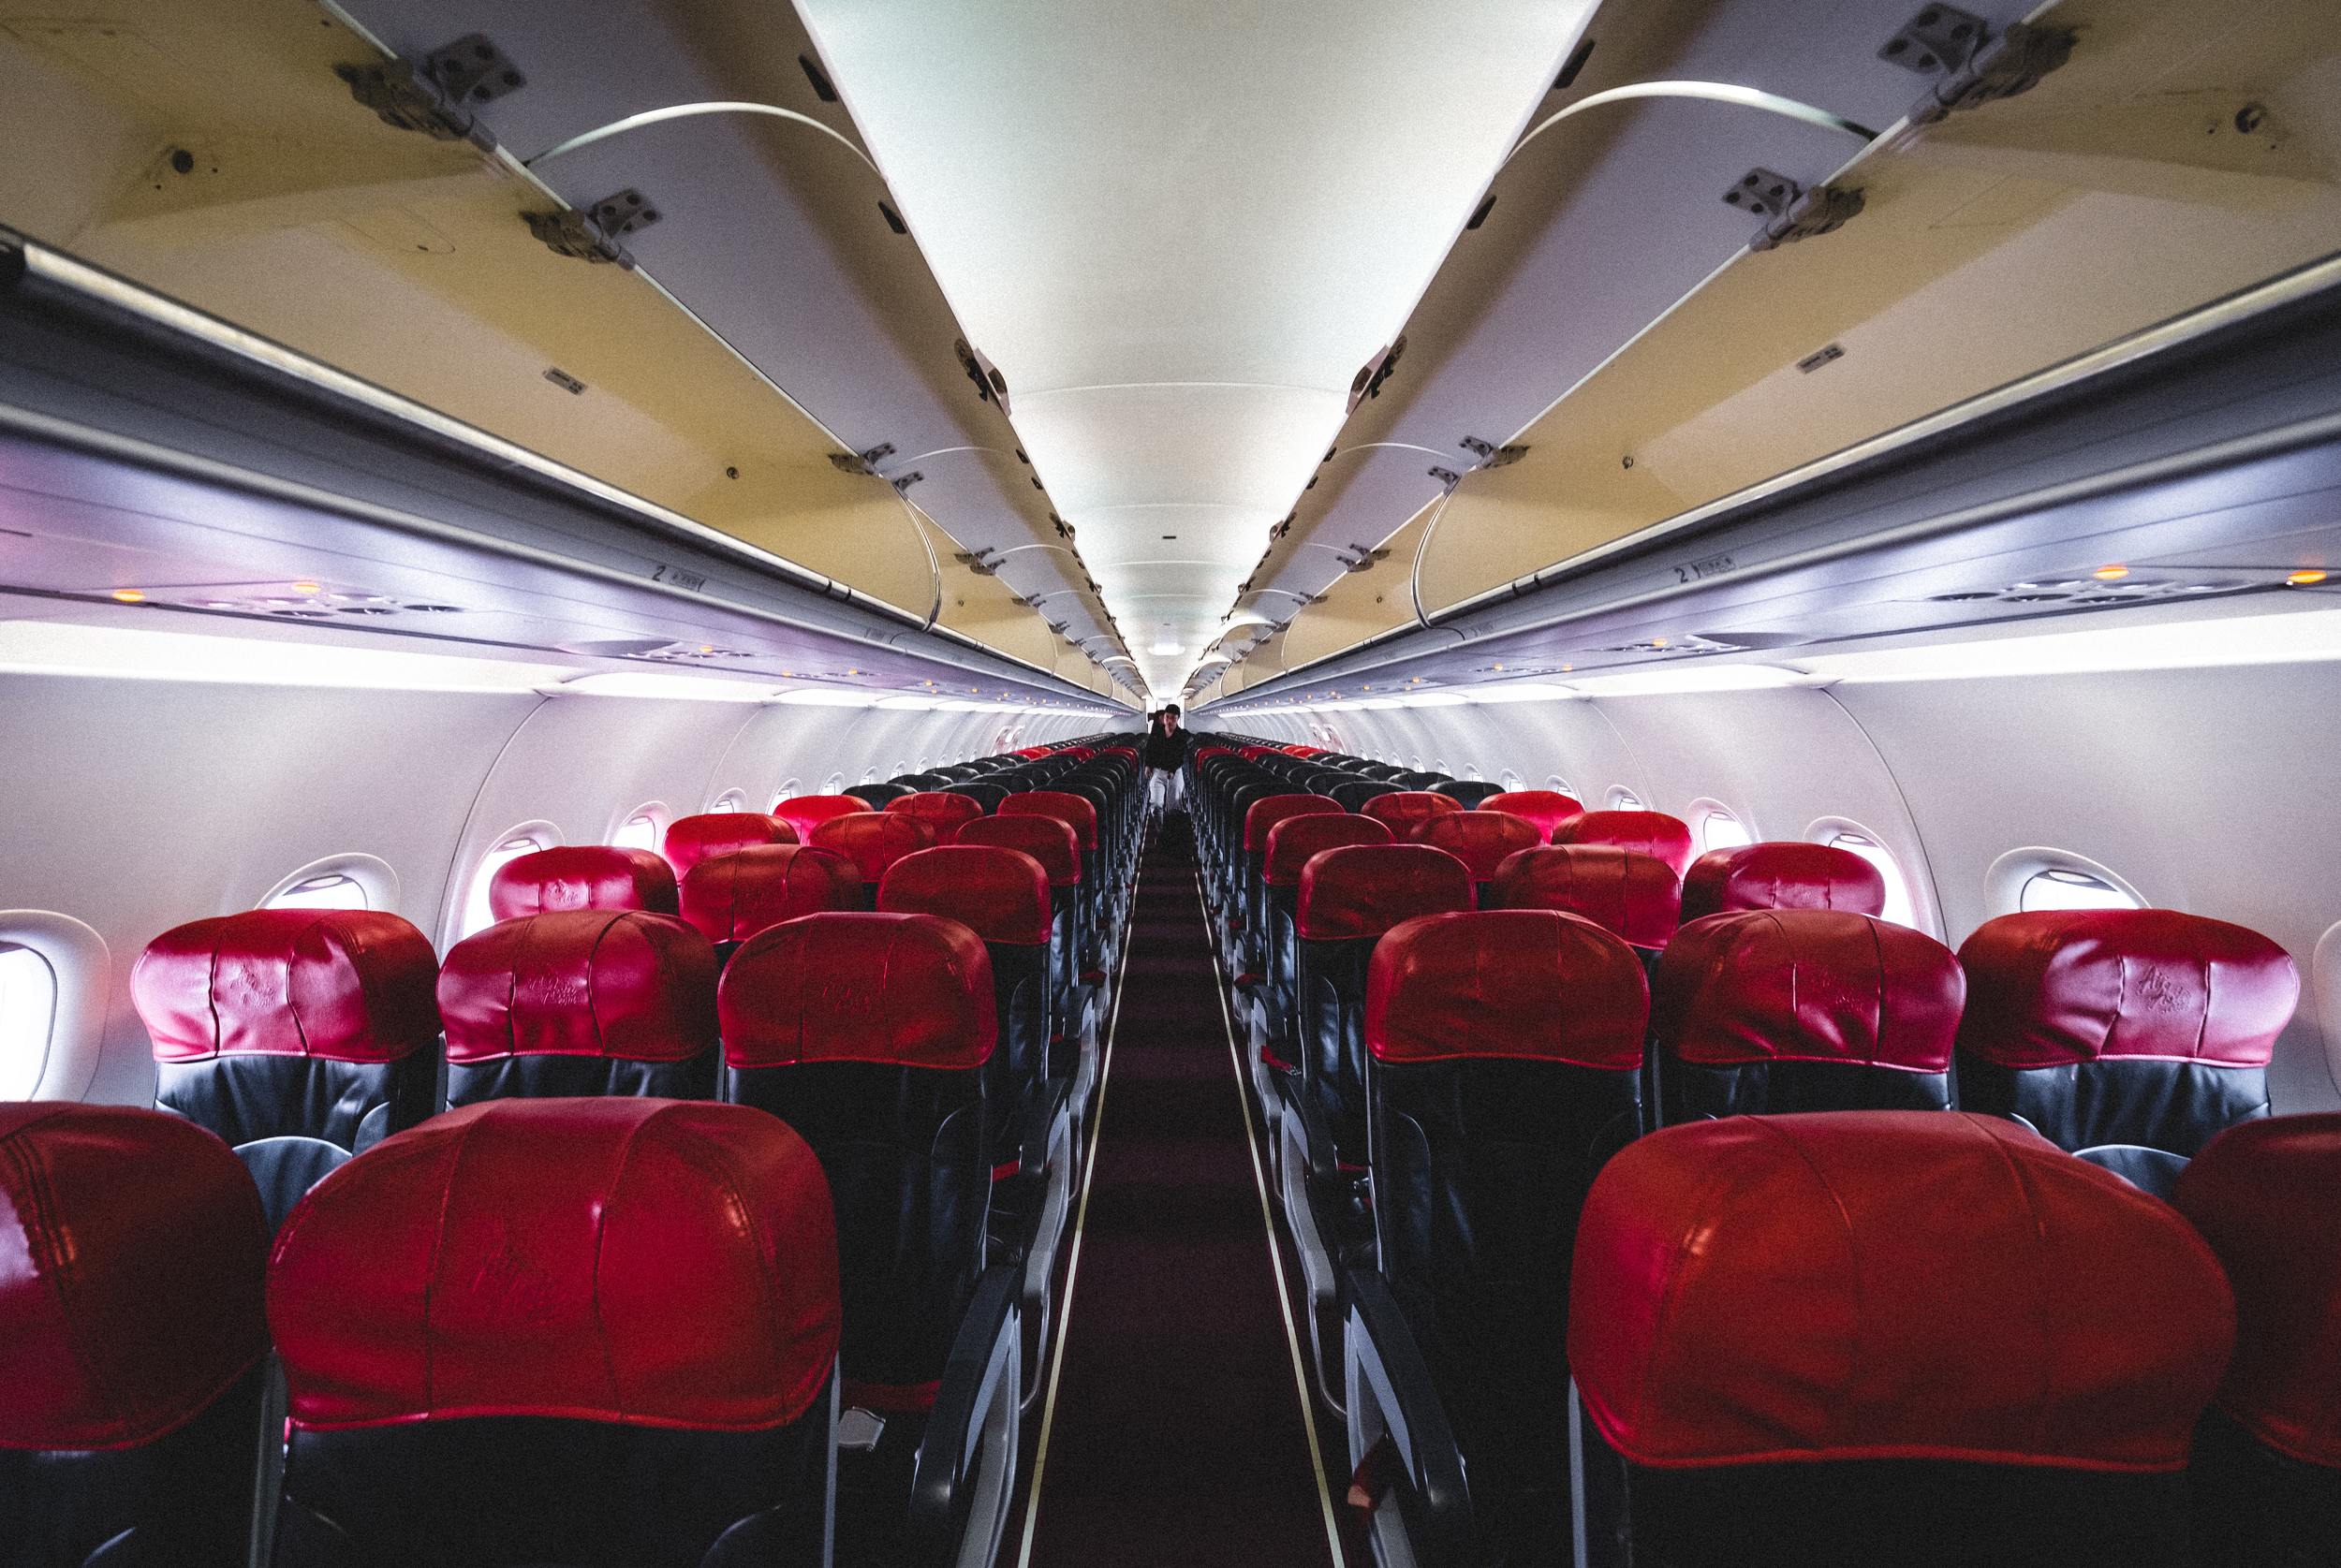 How to Avoid Getting Sick on a Plane